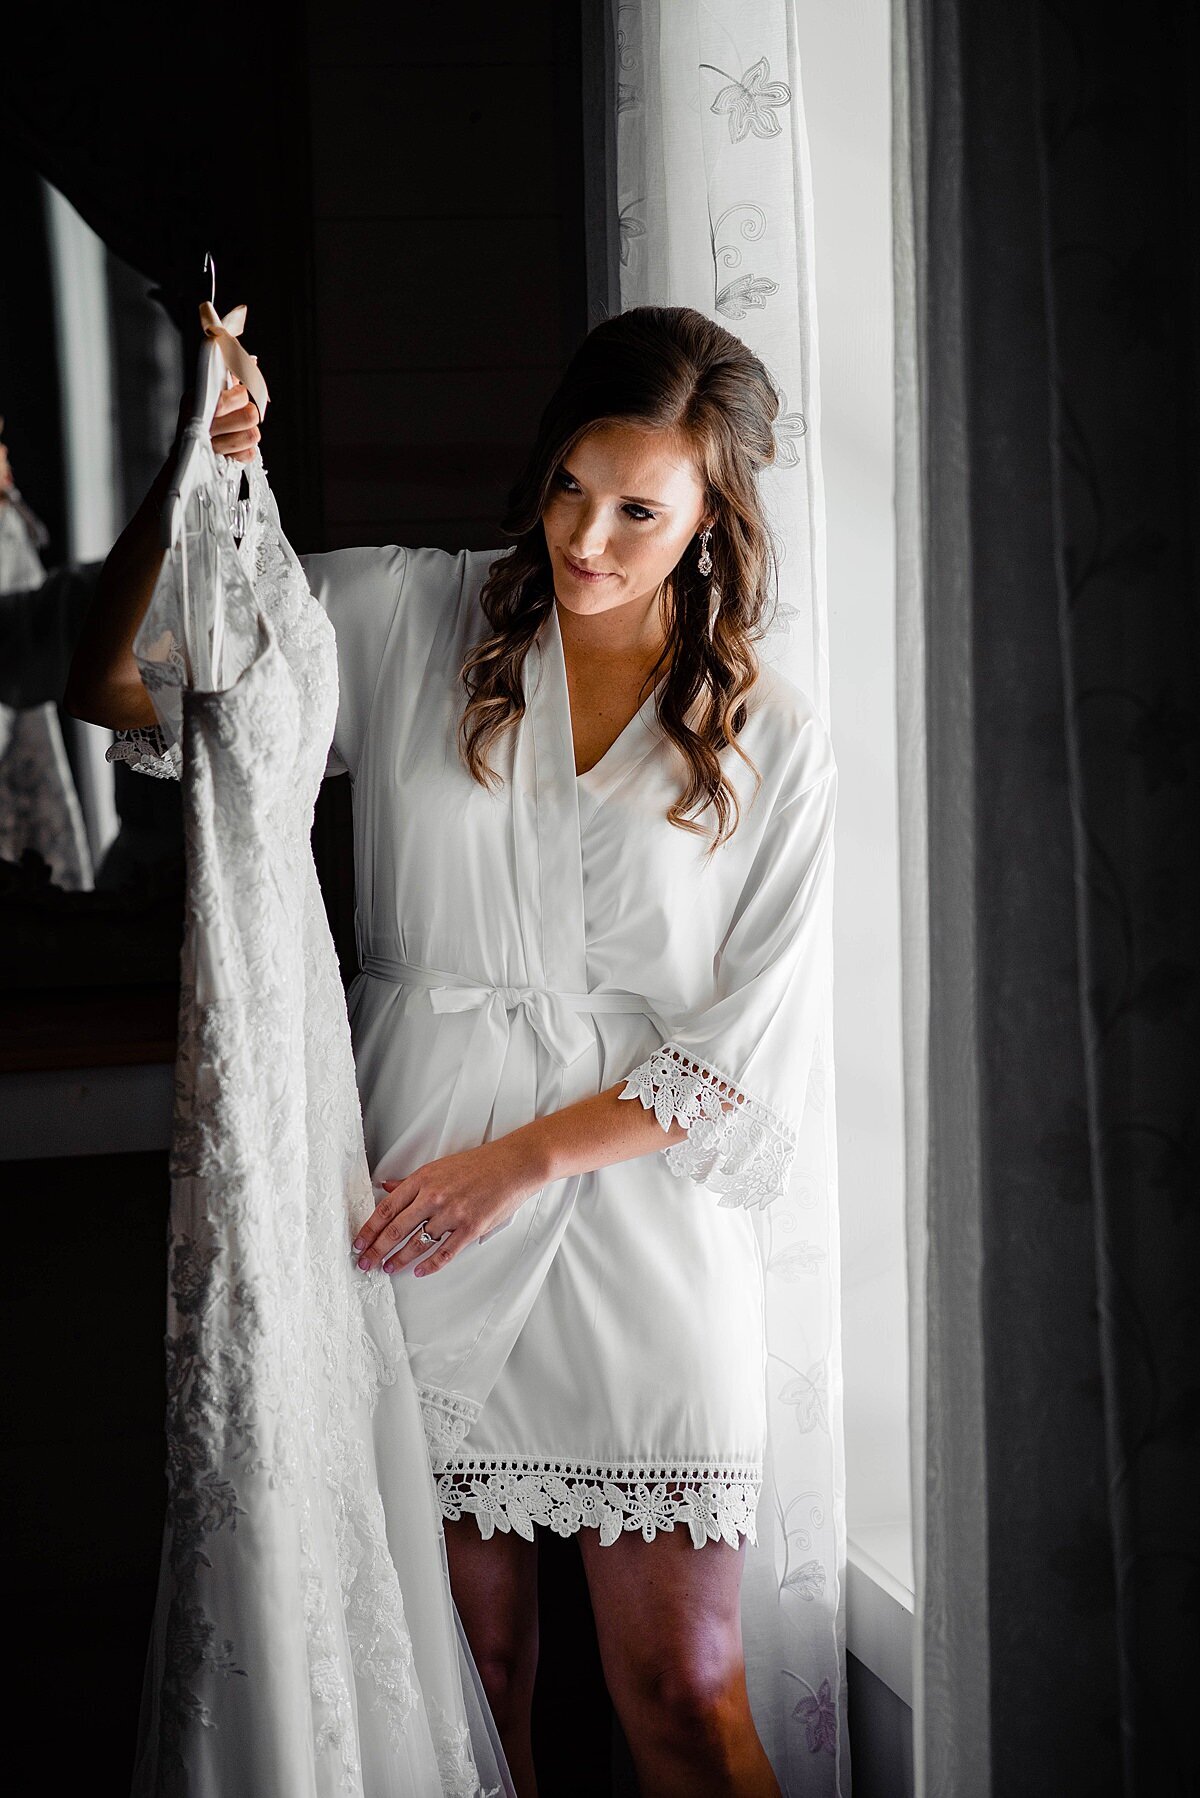 Bride standing beside the window in the bridal room at Cranford Hollow, her hair is curled and down and she has a white robe with lace trim on